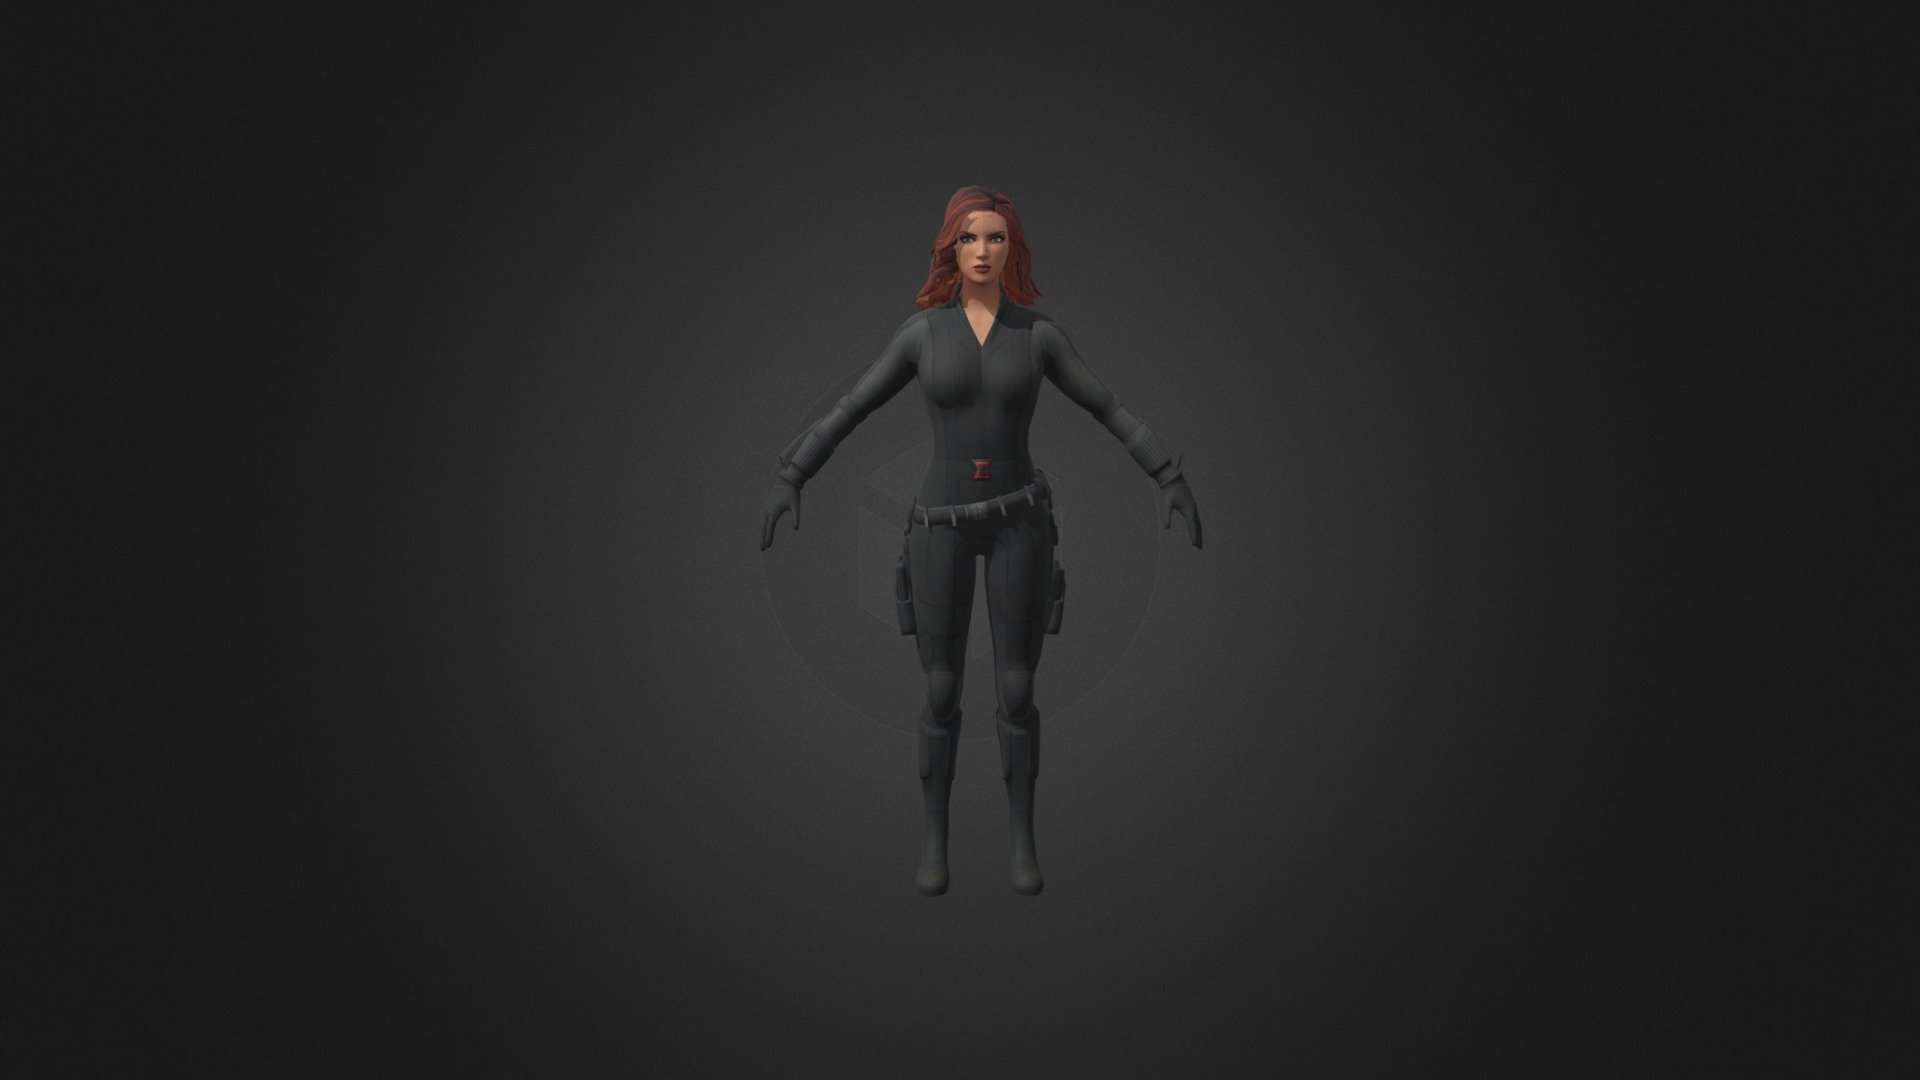 Hi I am Omaxx FF !!
Download These Awesome Models from me this very extreme quality Models.

This Is The Model Of Black Widow !!
But The Texture Of The Black Widow Is Very Awesome Download And then See ❤️

There Is Many Formats Of 3D Model :-
° OBJ (.obj .mtl )
° Autodesk Fbx (.fbx)
° Blender (.blender)
° Stereolithography ( .STL) - Black Widow 3D Model - 3D model by OmaxxFF 3d model